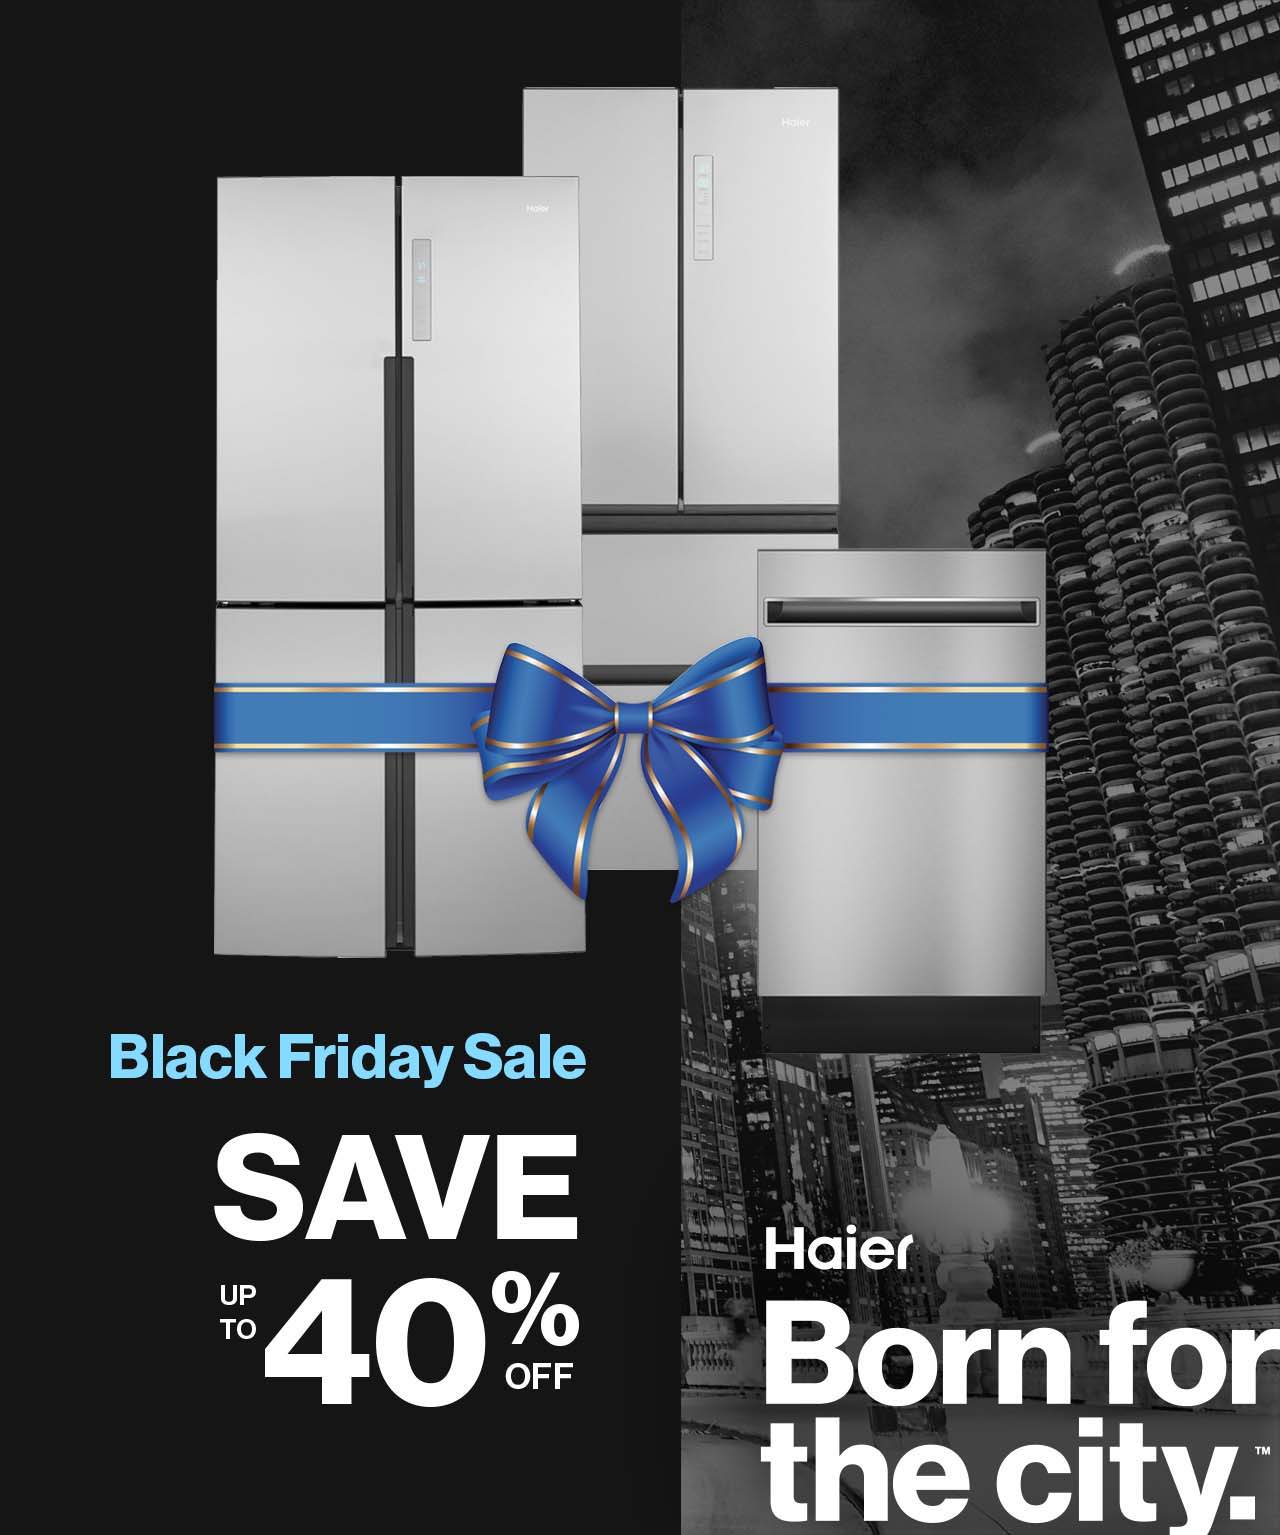 Haier Black Friday Sale. Save up to 40% off. Huge savings on small-space appliances configured for city living.